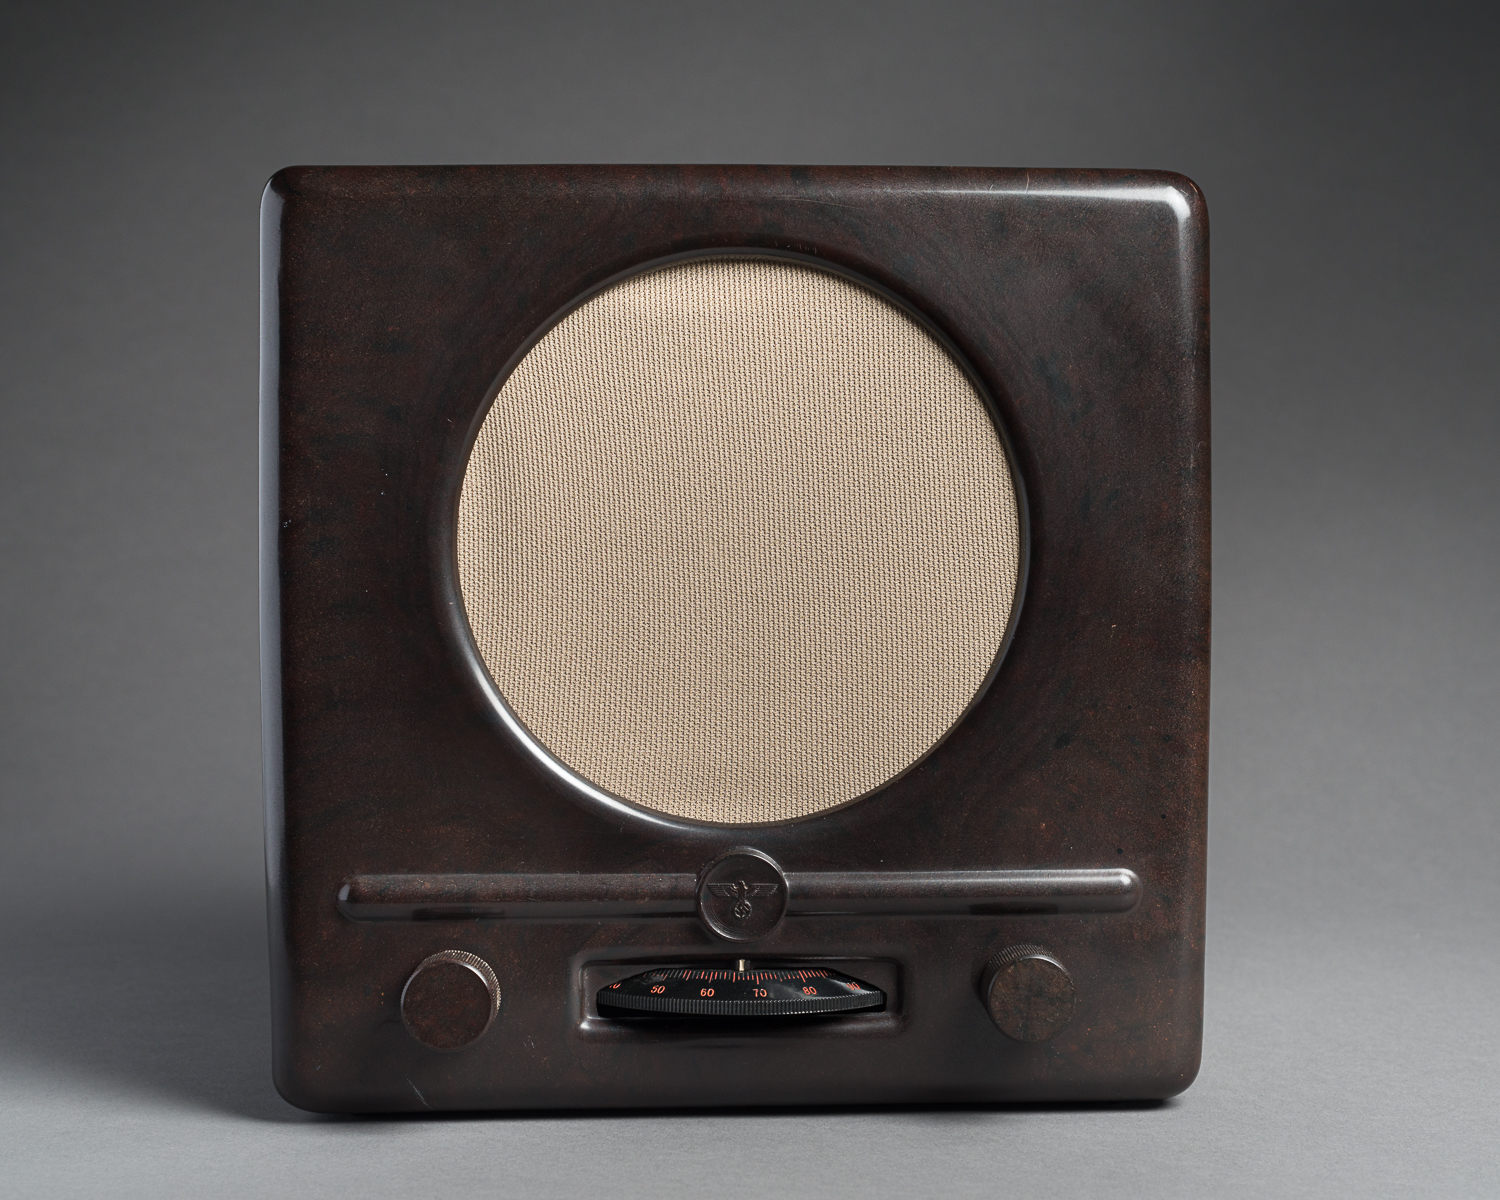 This DKE38 radio model was produced in Germany between 1938 and 1944. The Nazi Reichsadler symbol, an eagle with a swastika, is visible on the front. (Photo: Peter Berra)